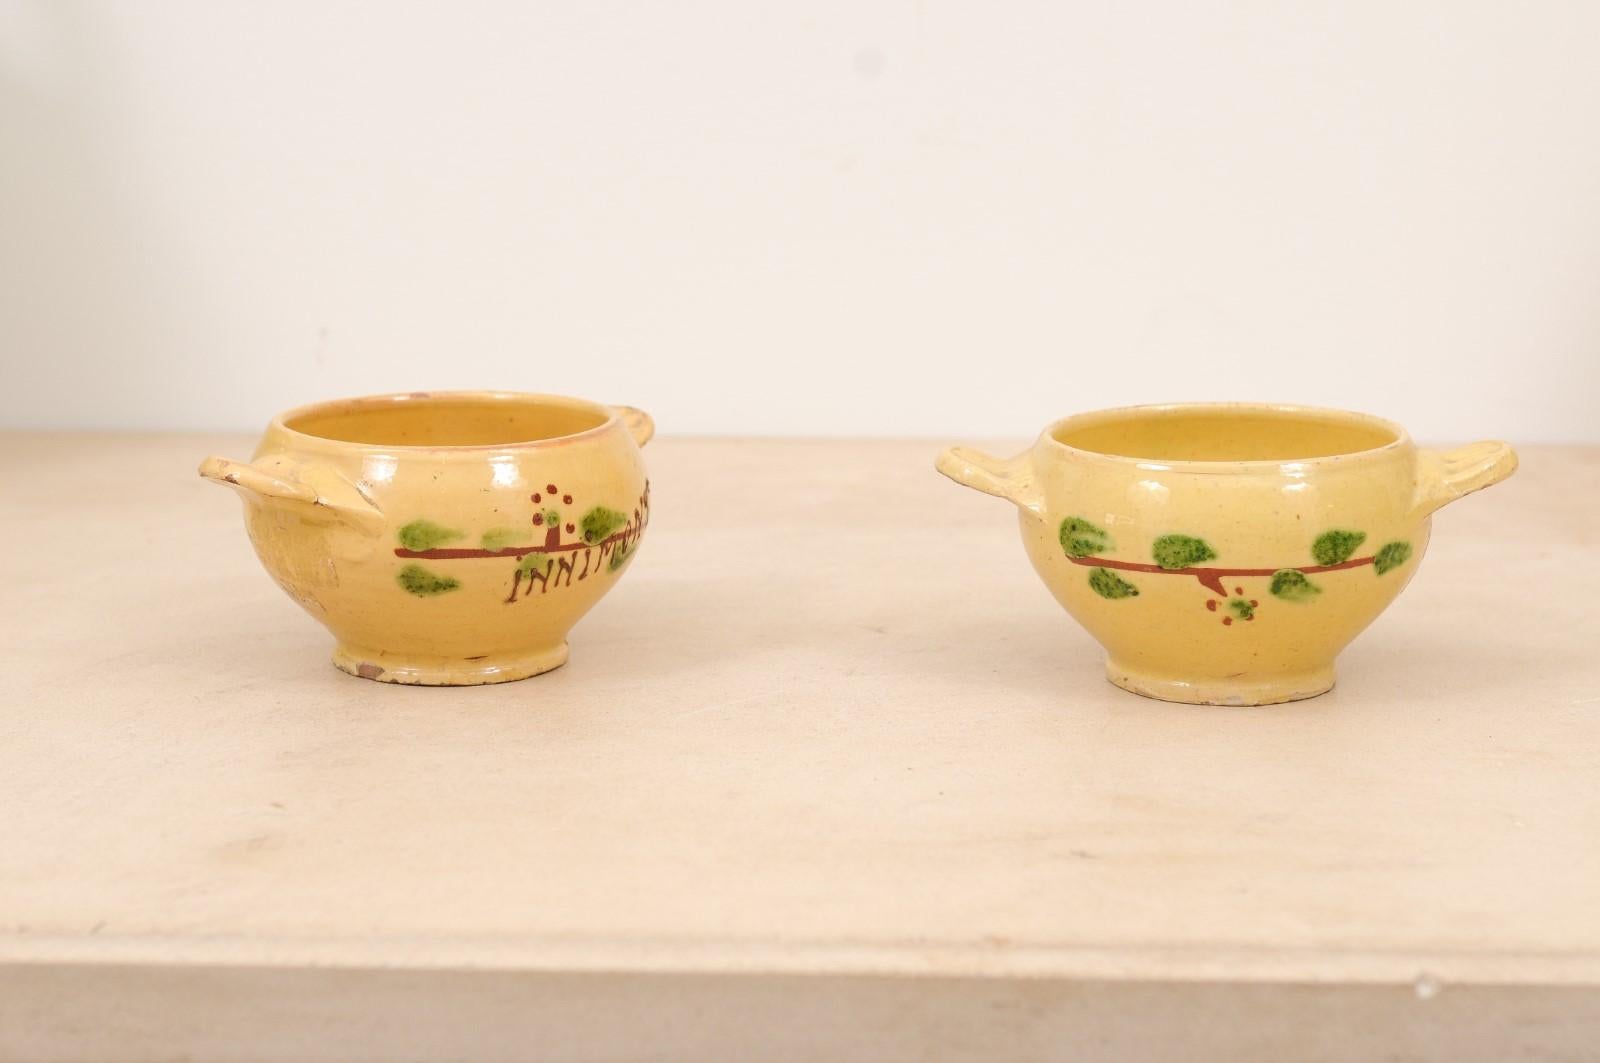 Two small 19th century French yellow glazed pottery drinking bowls from the town of Innimont, with stylized foliage motifs, priced and sold separately $295 each. Created in Eastern France during the 19th century and made to drink tea, coffee or hot